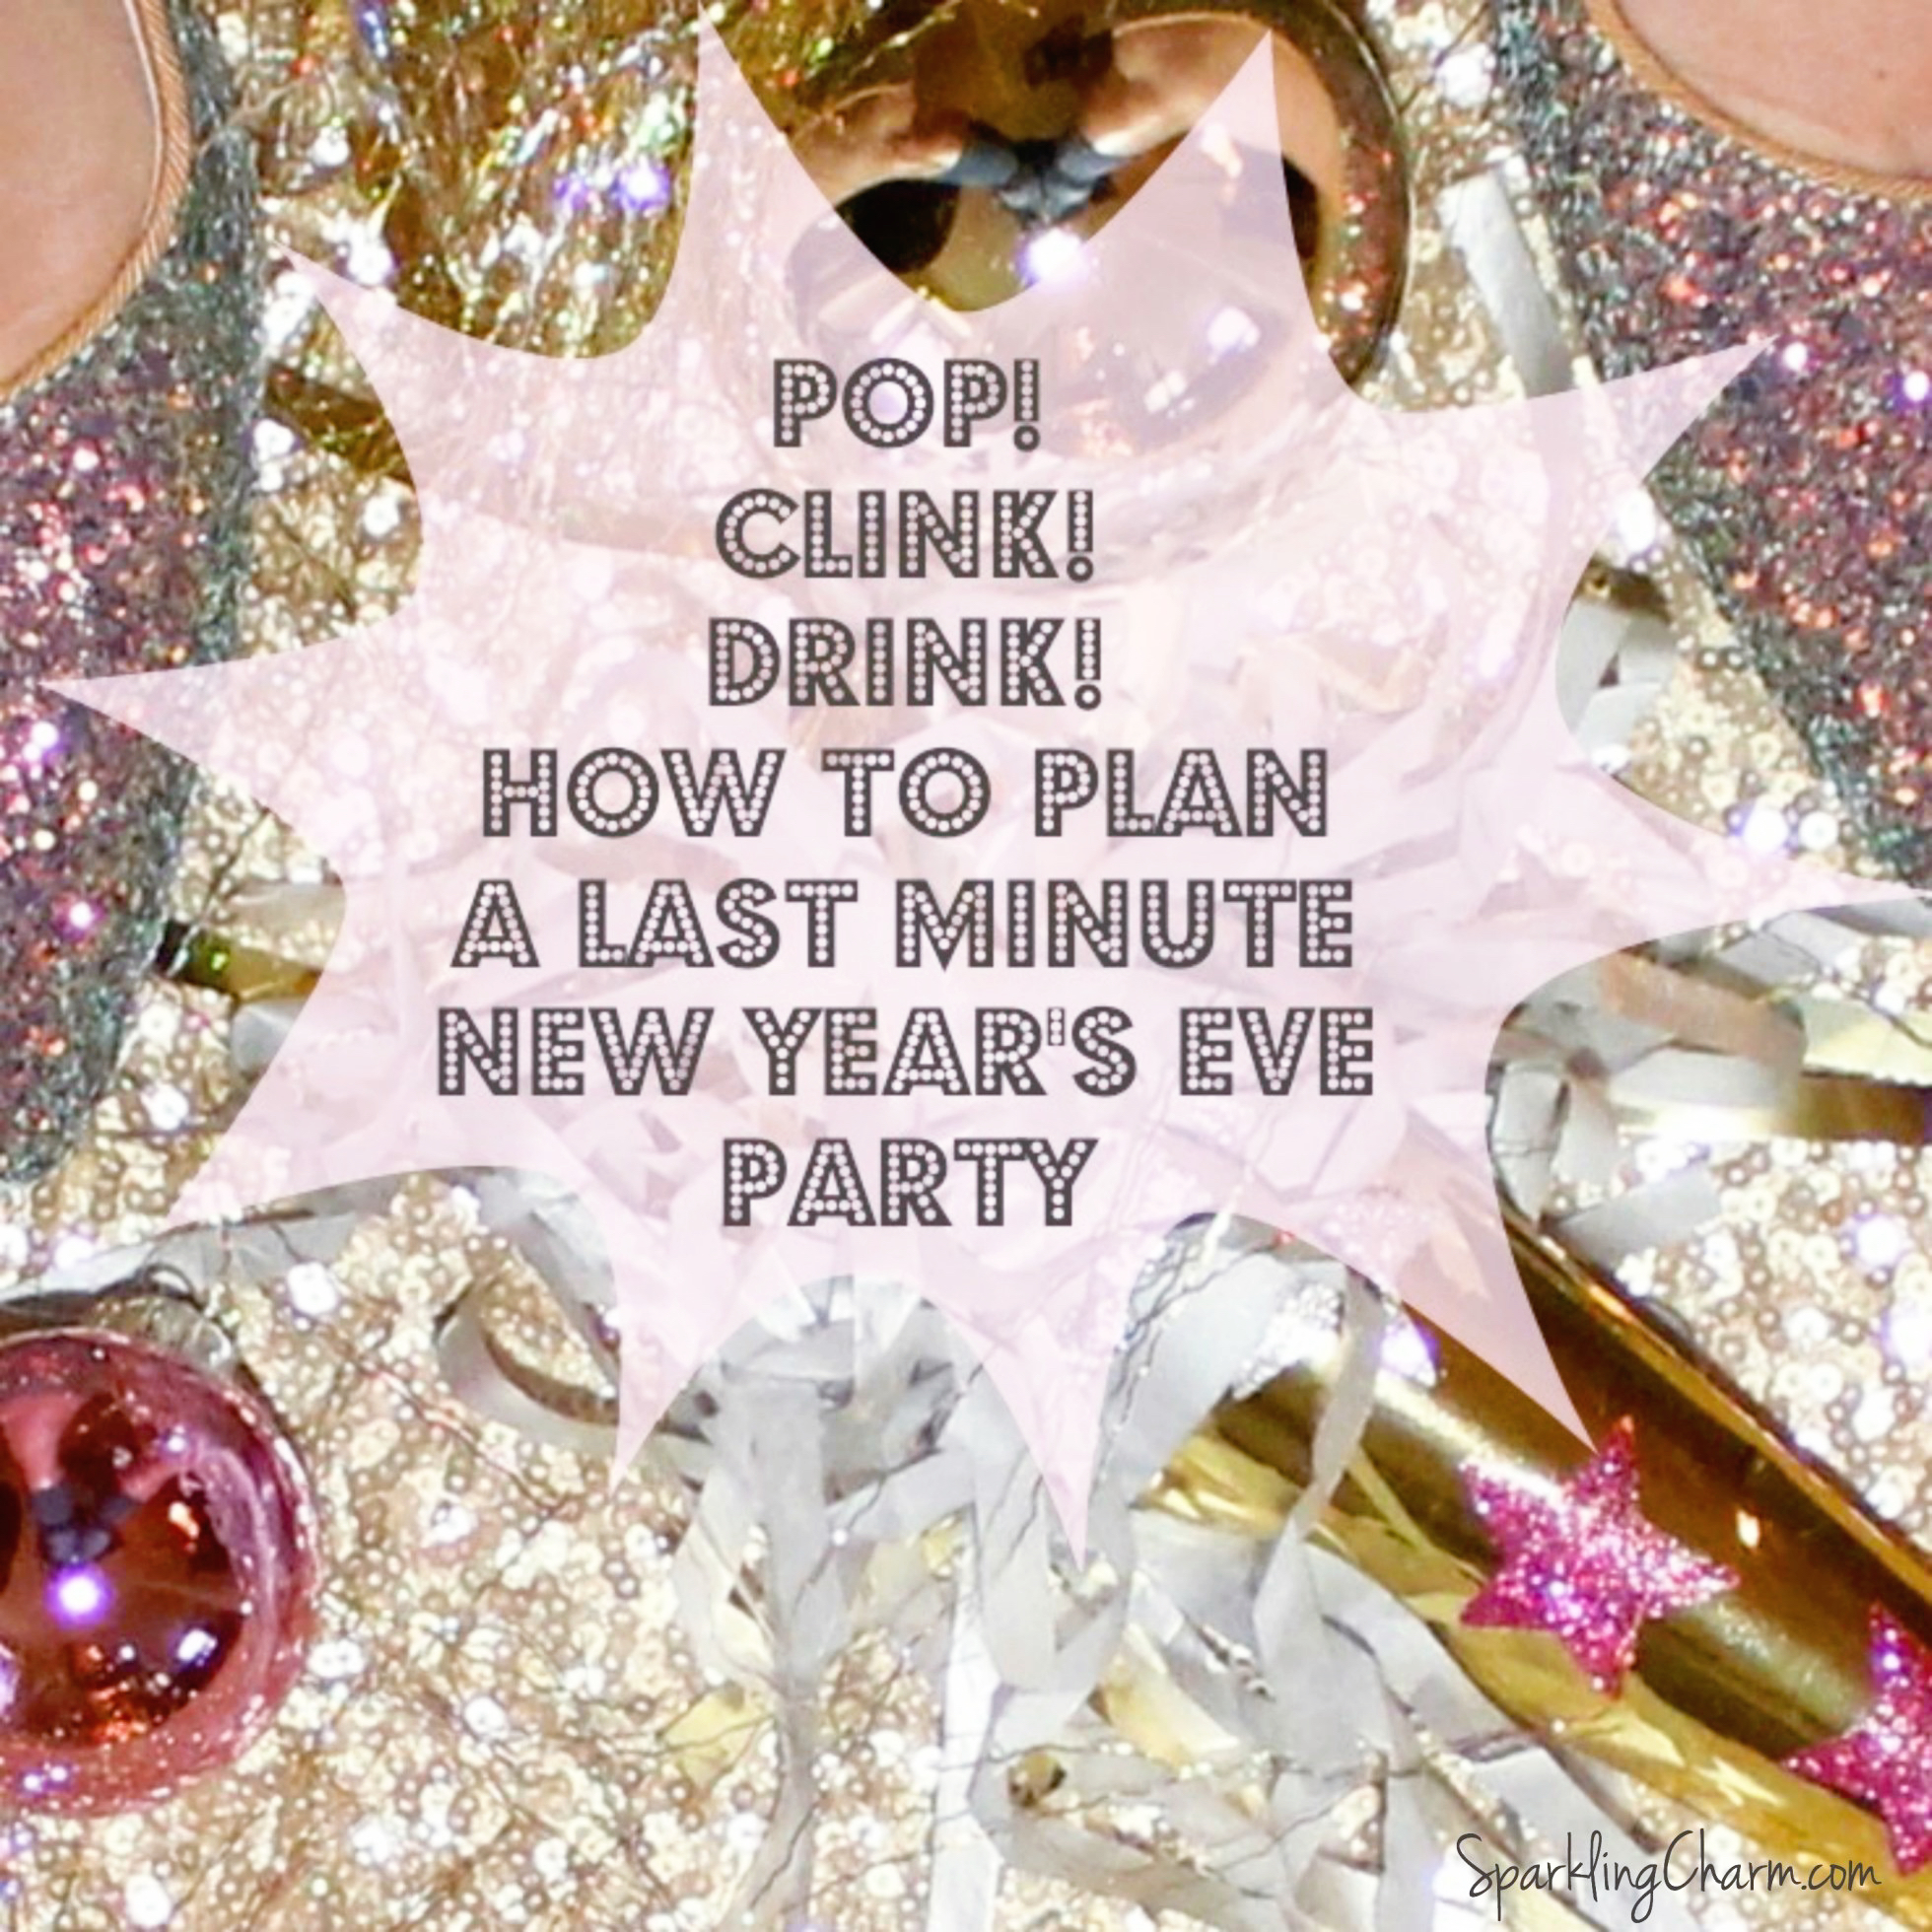 Pop! Clink! Drink! How a Last Minute New Year’s Eve Party